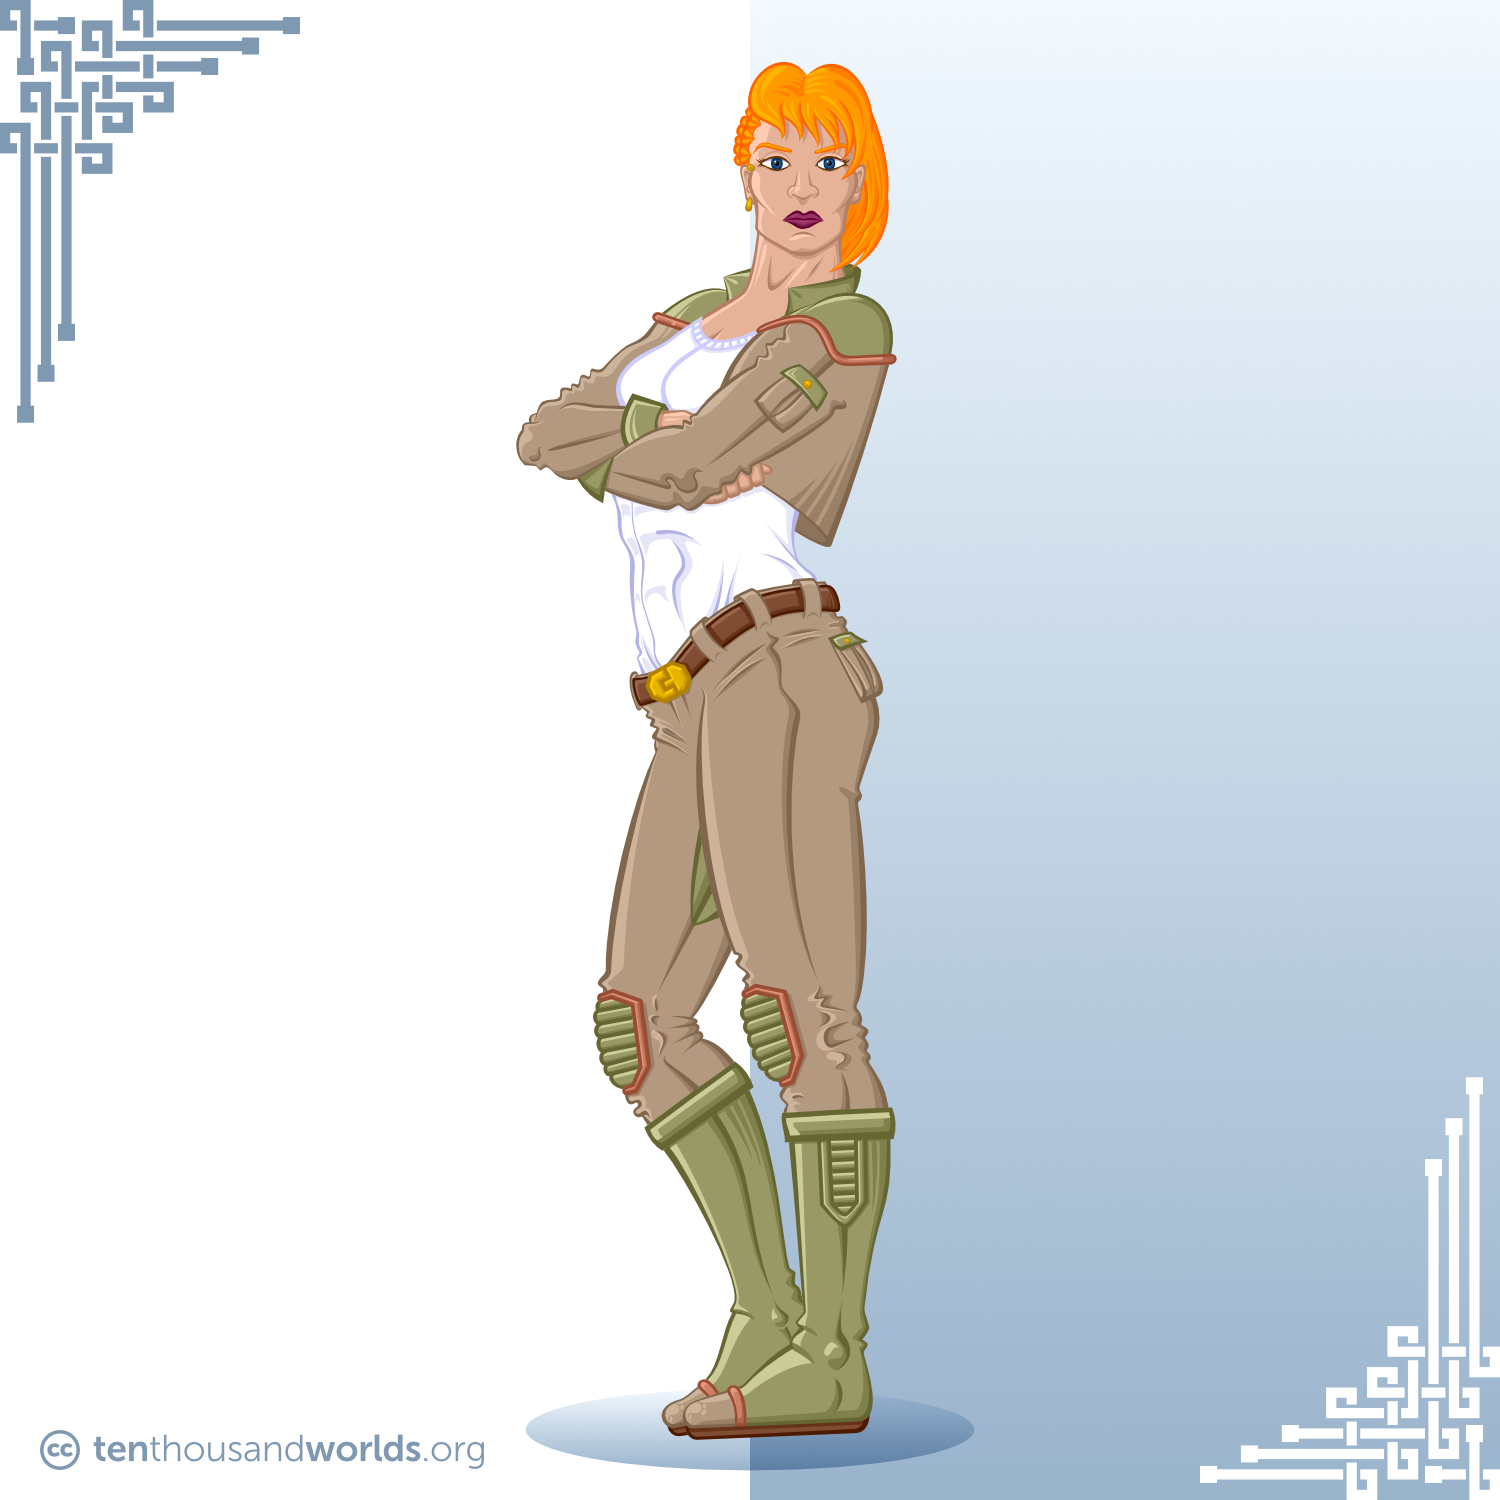 A red-headed woman in an olive and khaki futuristic pilot’s uniform standing with crossed arms.